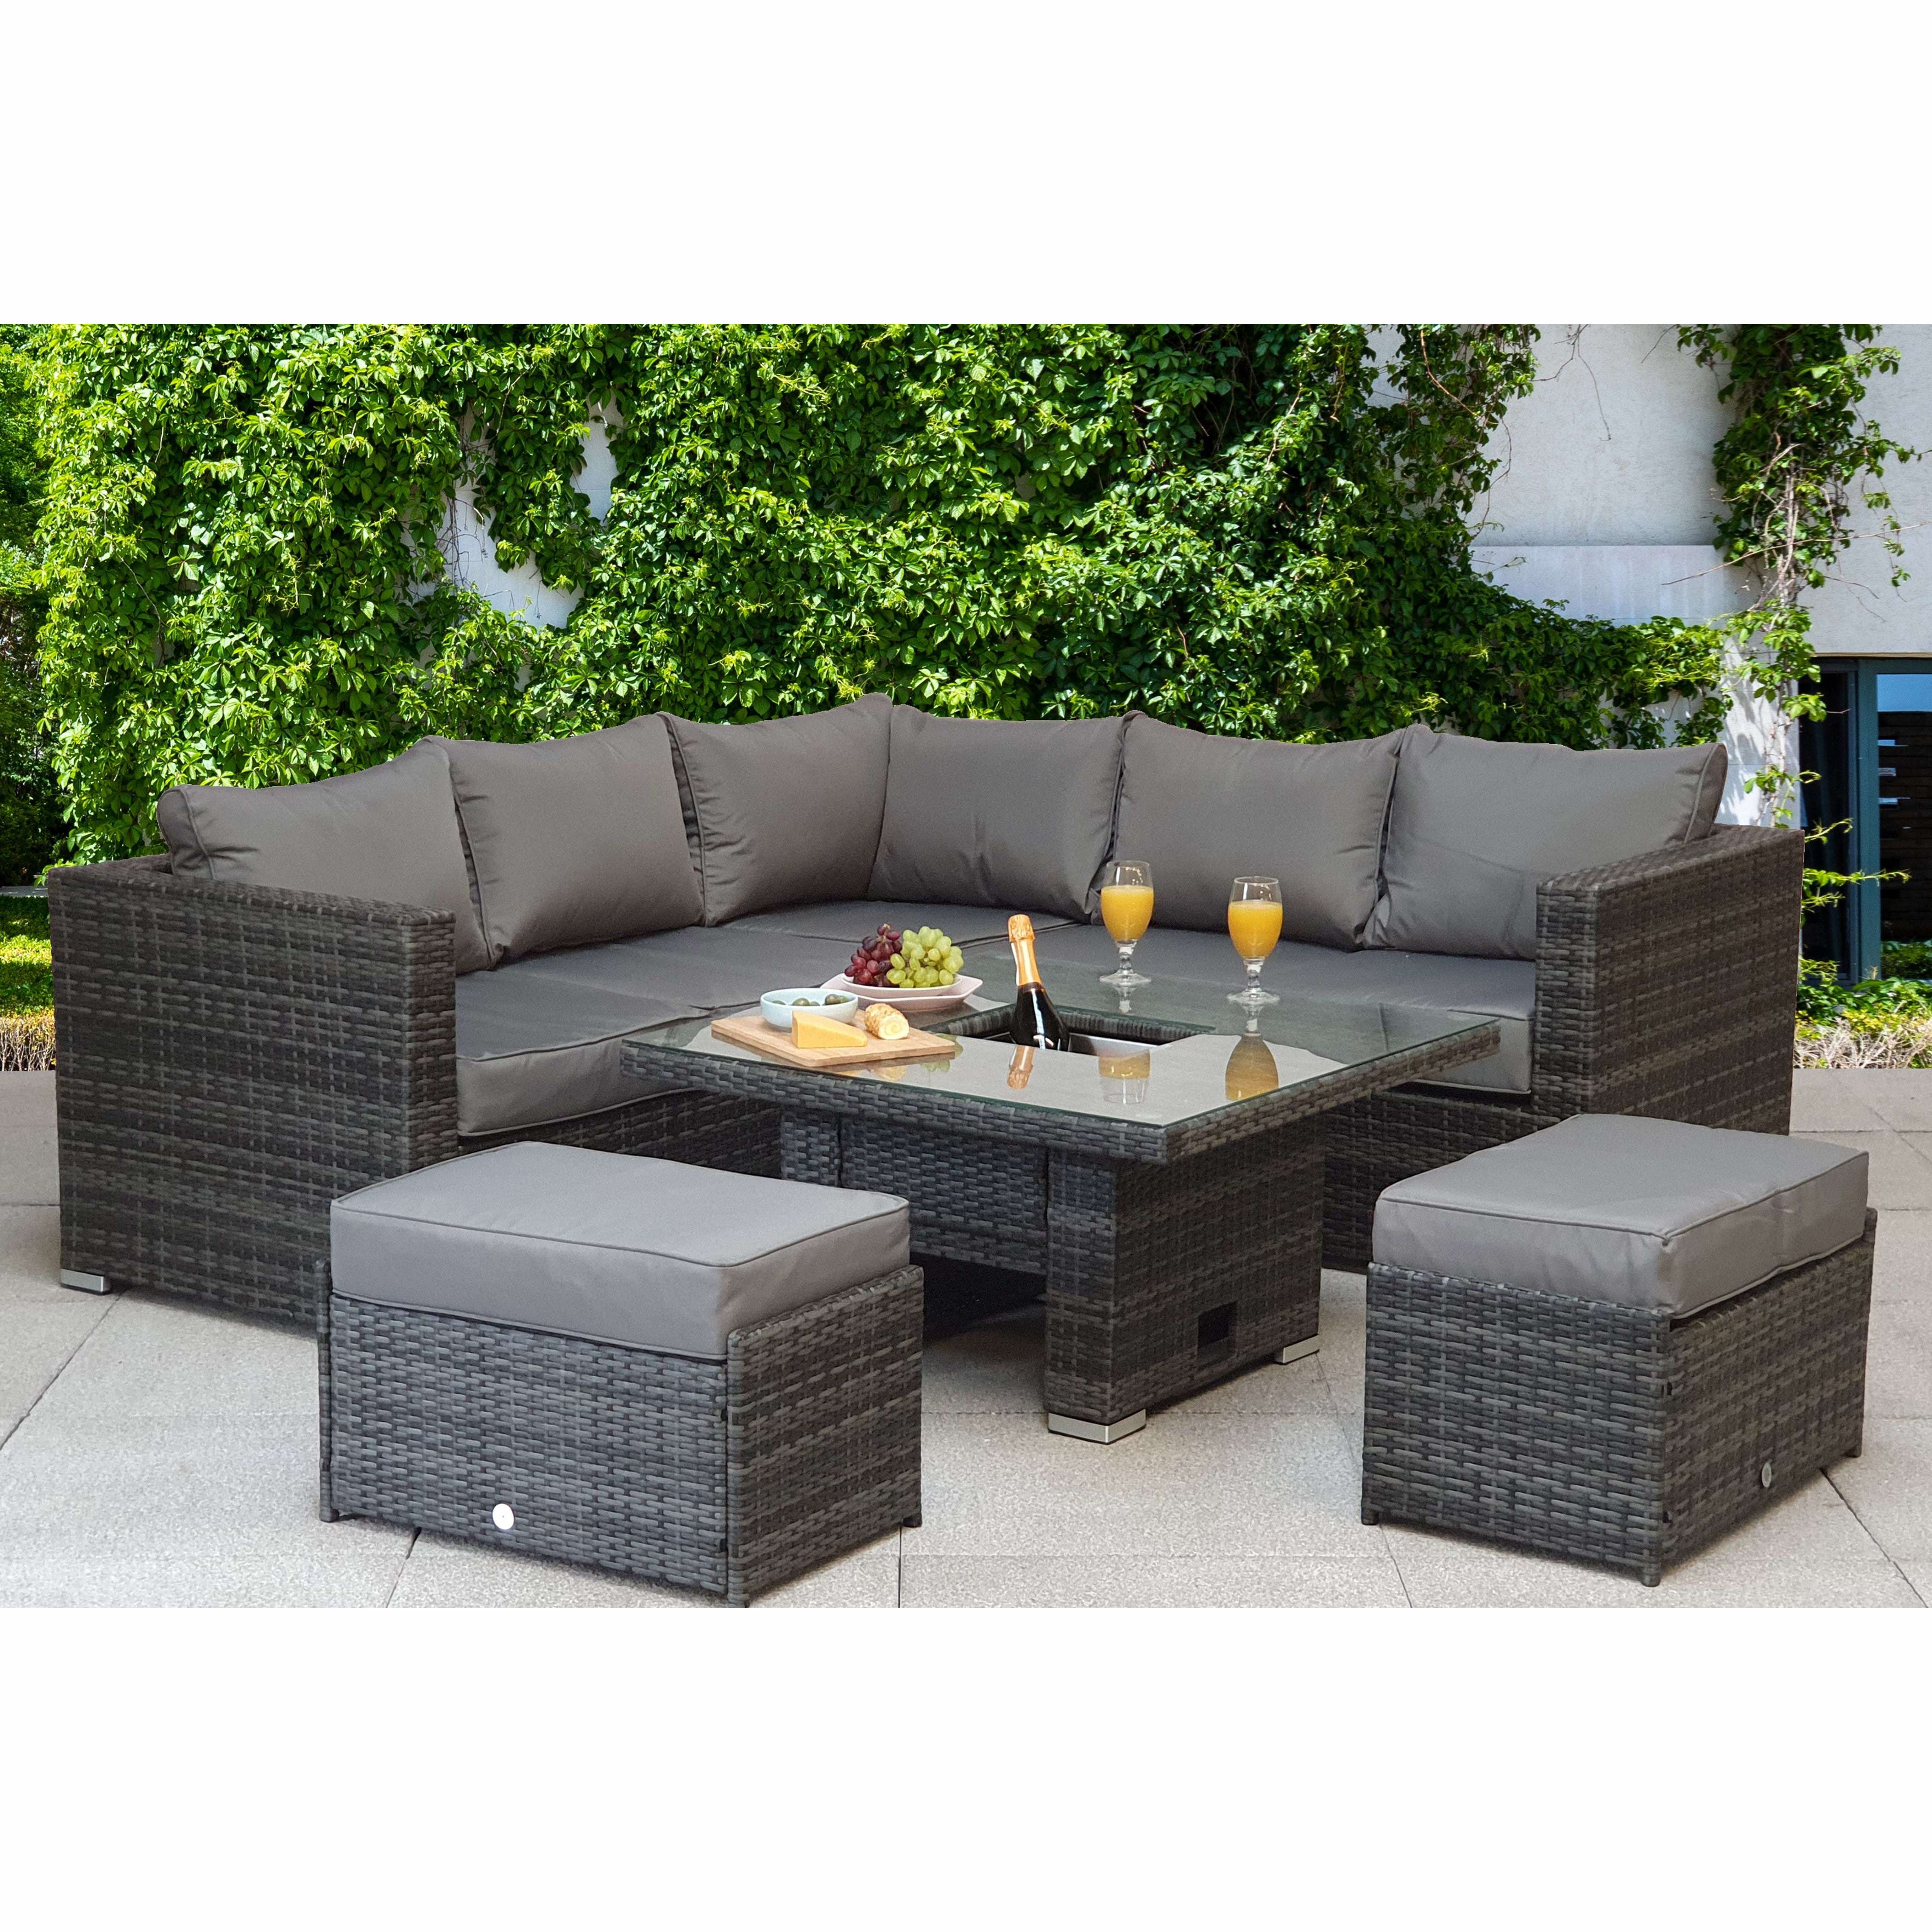 Exceptional Garden:Signature Weave Georgia Corner Dining Set with Ice Bucket and Lift Table - Grey